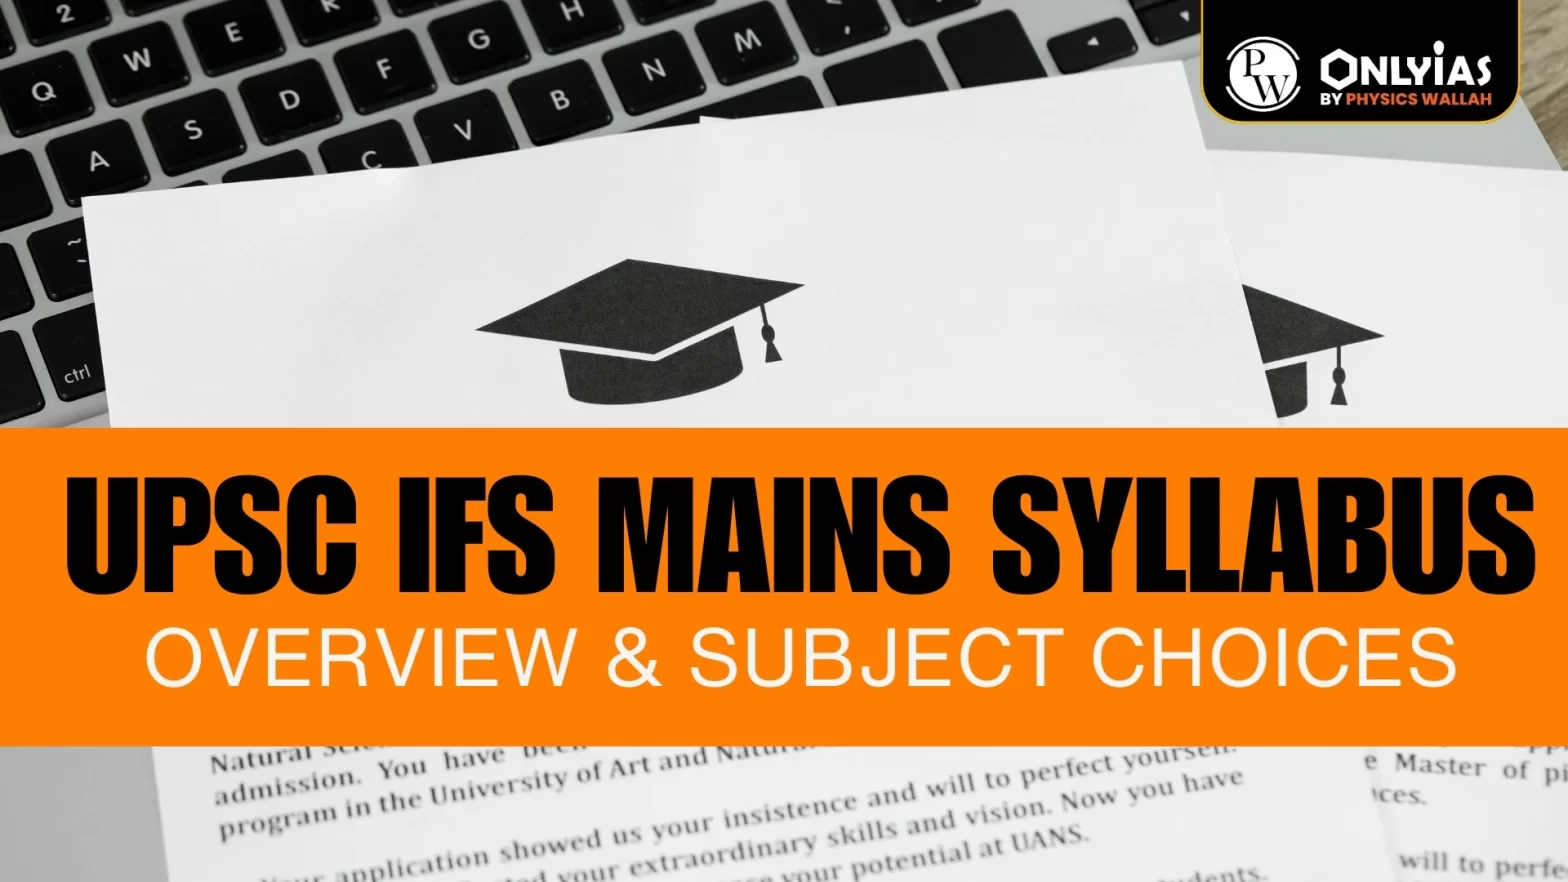 UPSC IFS Mains Syllabus: Overview & Subject Choices